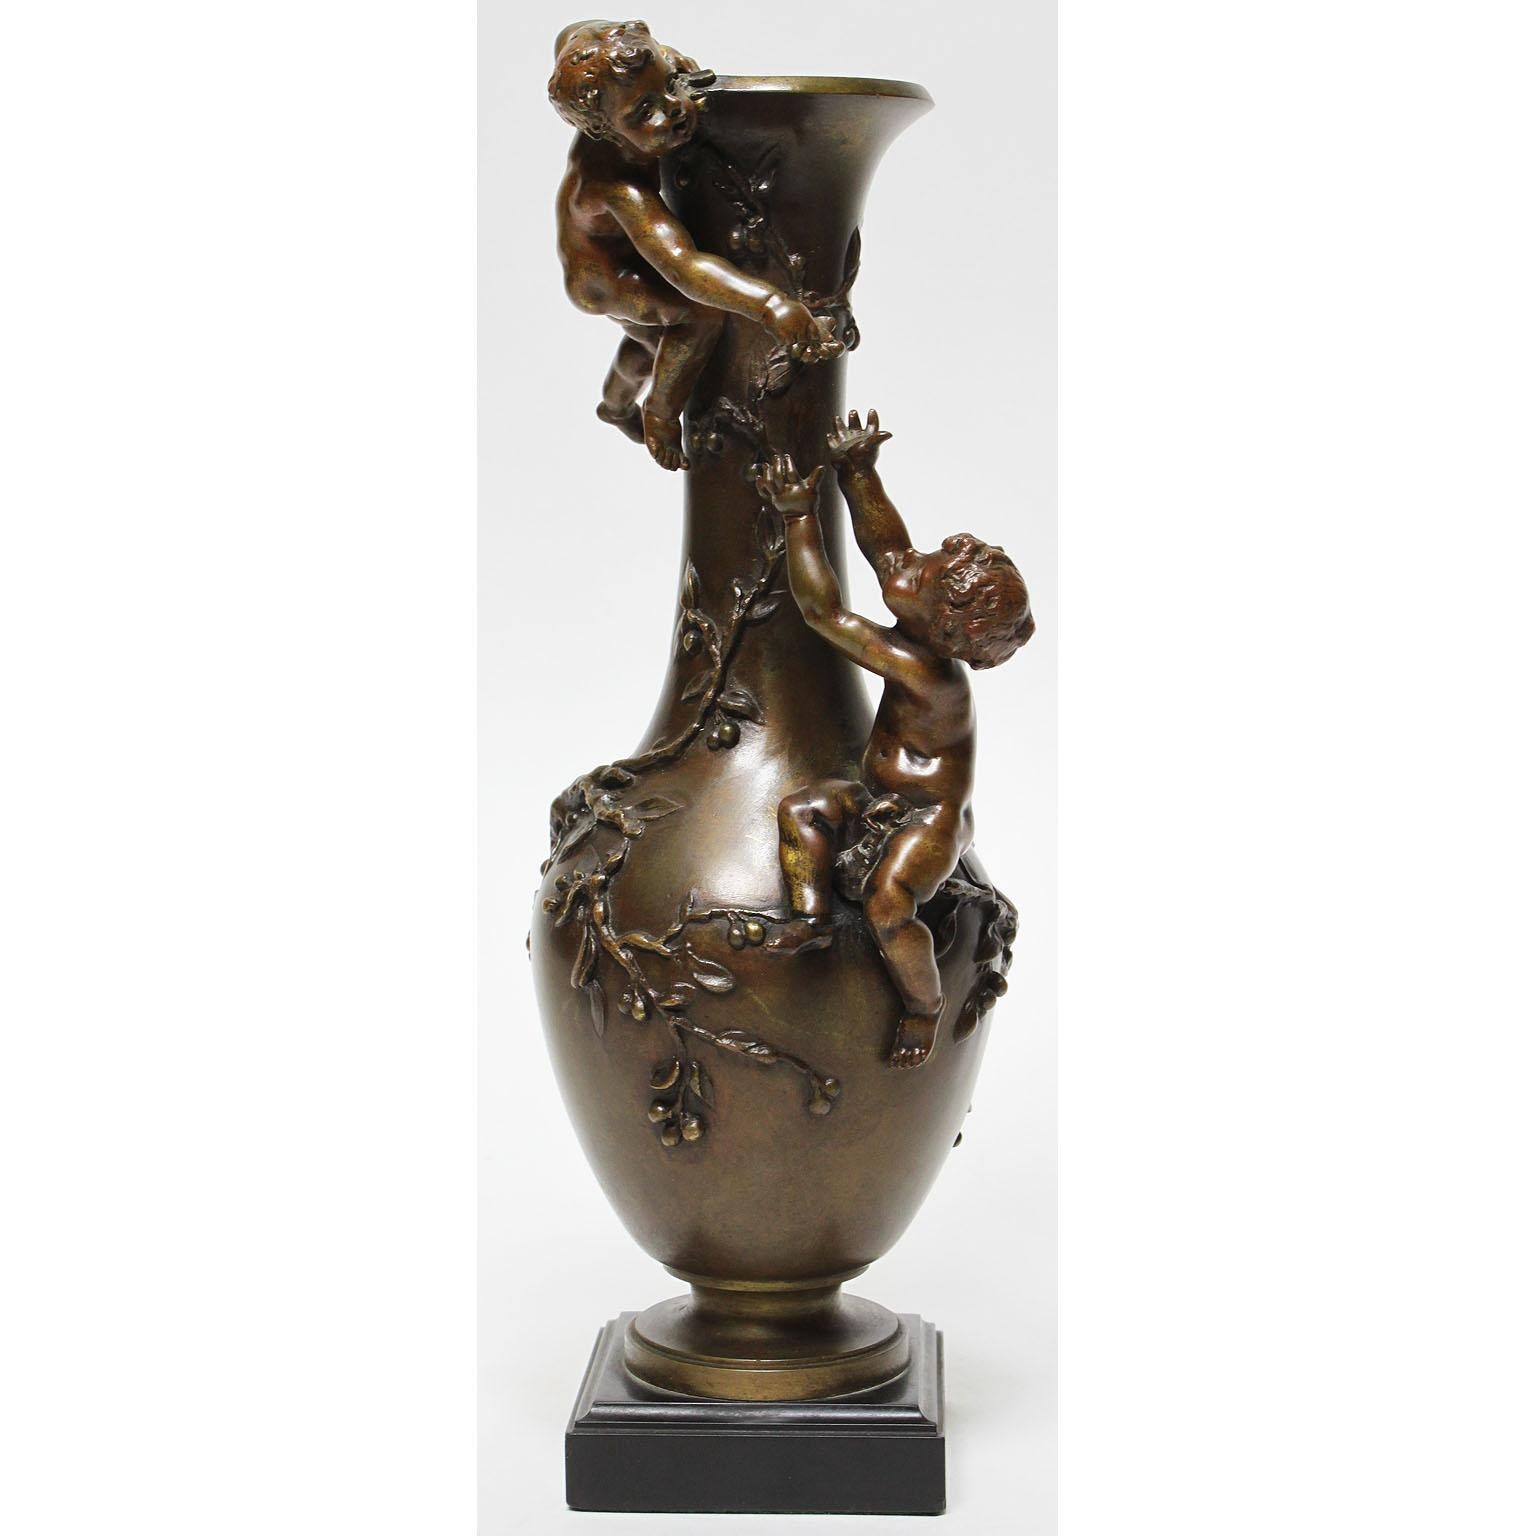 Henri-Honoré Plé (French, 1853-1922) a fine and charming patinated Bronze group of a two young boys climbing on a vase with cherry blossoms vines. The finely executed bronze group depicting two semi-naked infant boys climbing atop a bottle-shaped